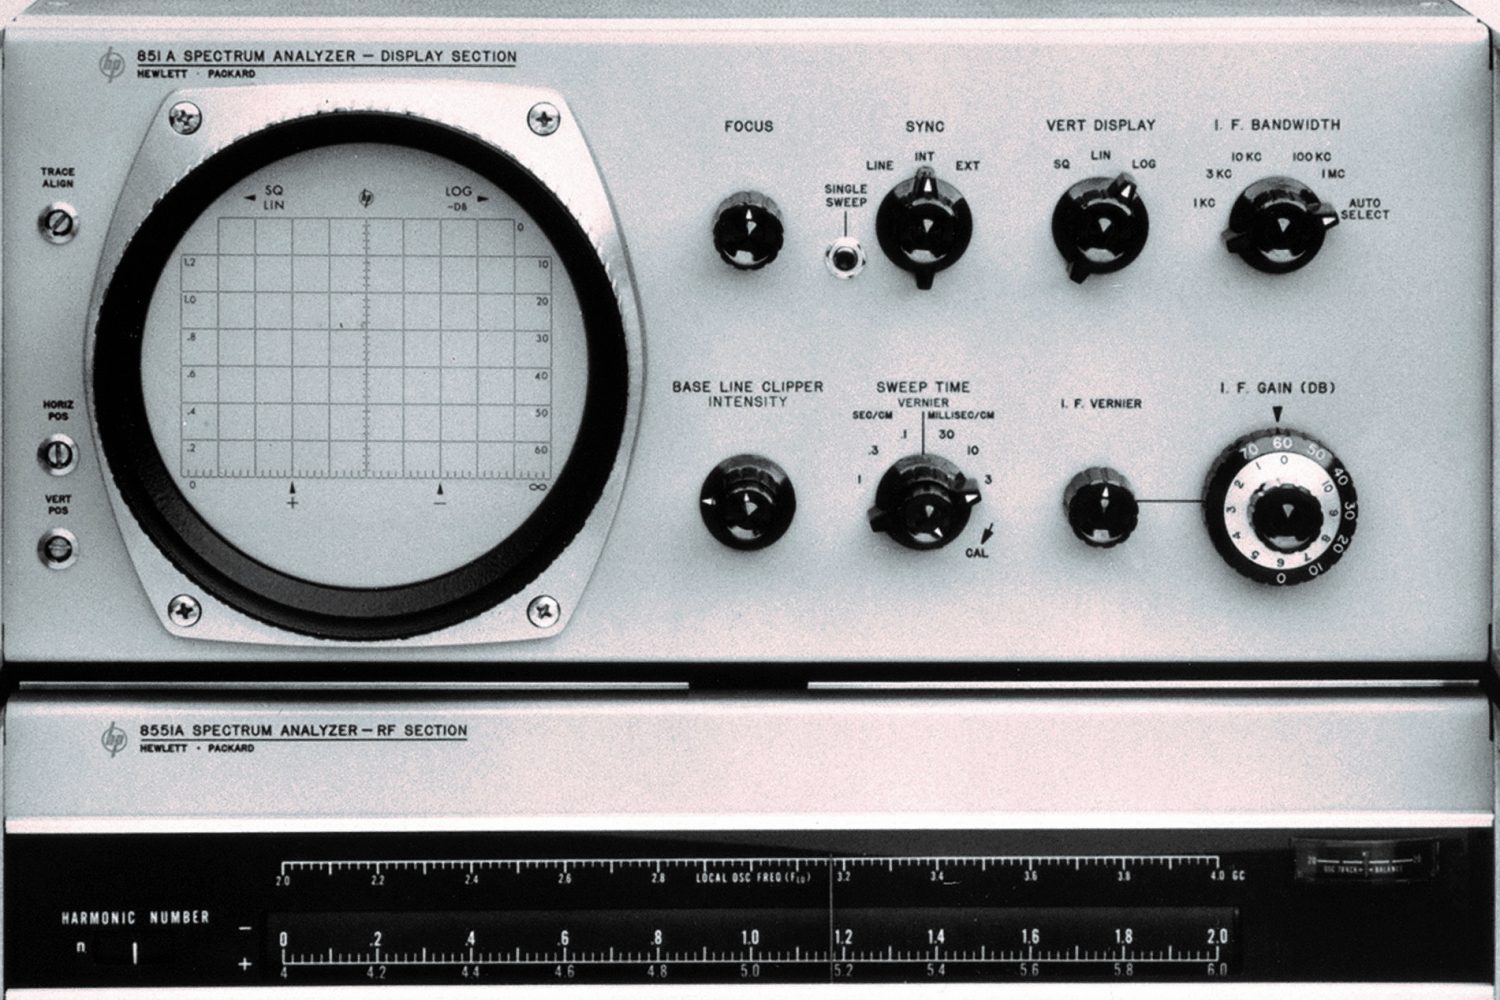 A photo of the HP 8551 microwave spectrum analyzer.